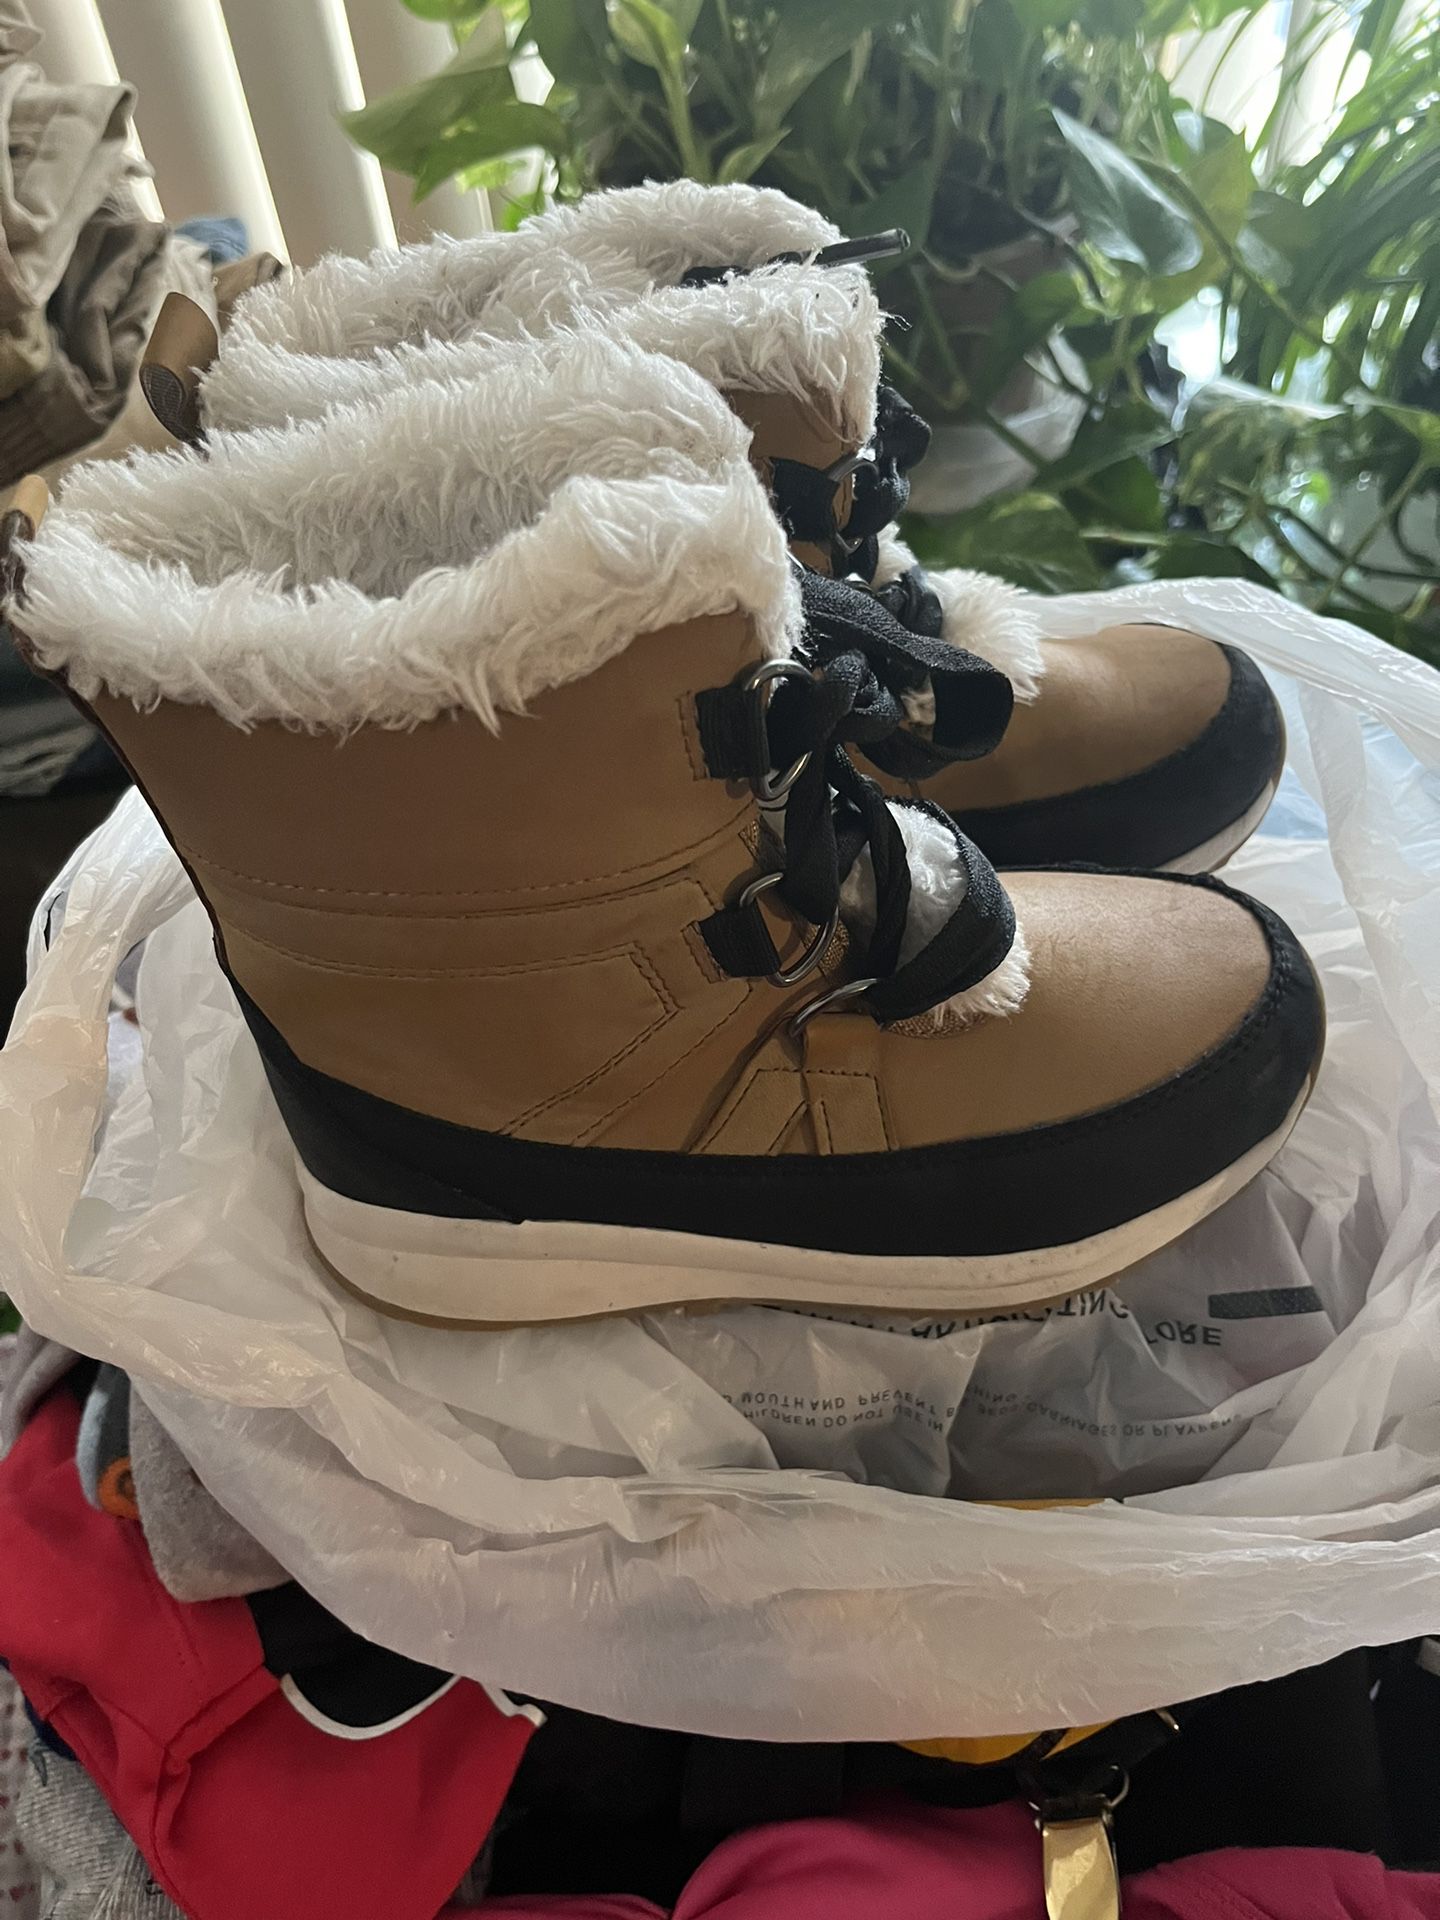 Little Girl Boots, Size 13 $30 Used in very Good Condition, warm Fur in the inside.